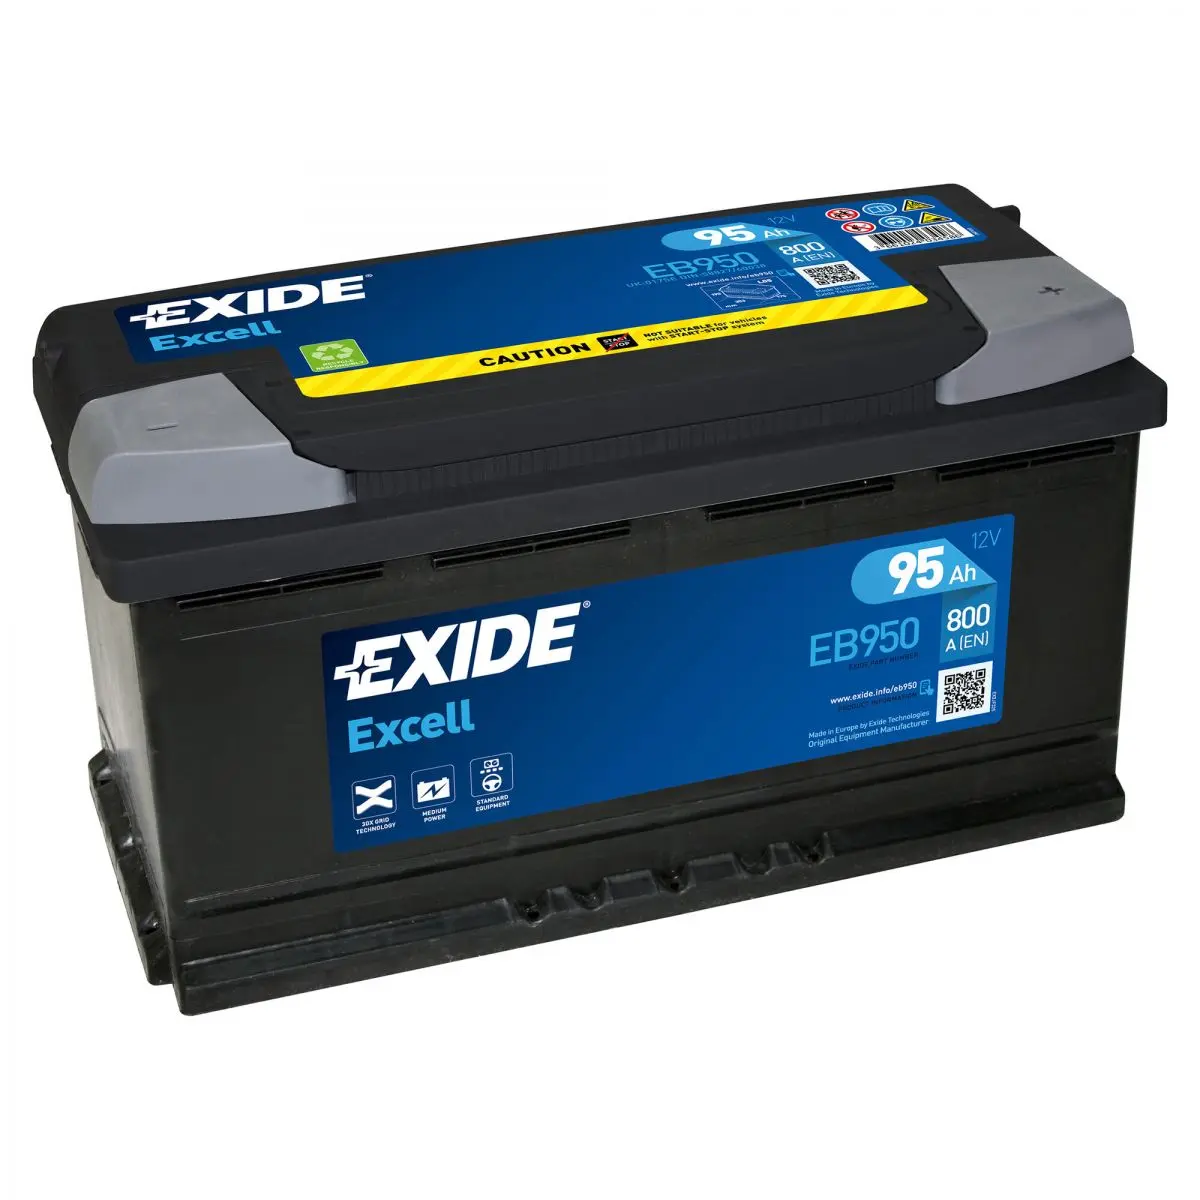 Exide Excell - EB 950